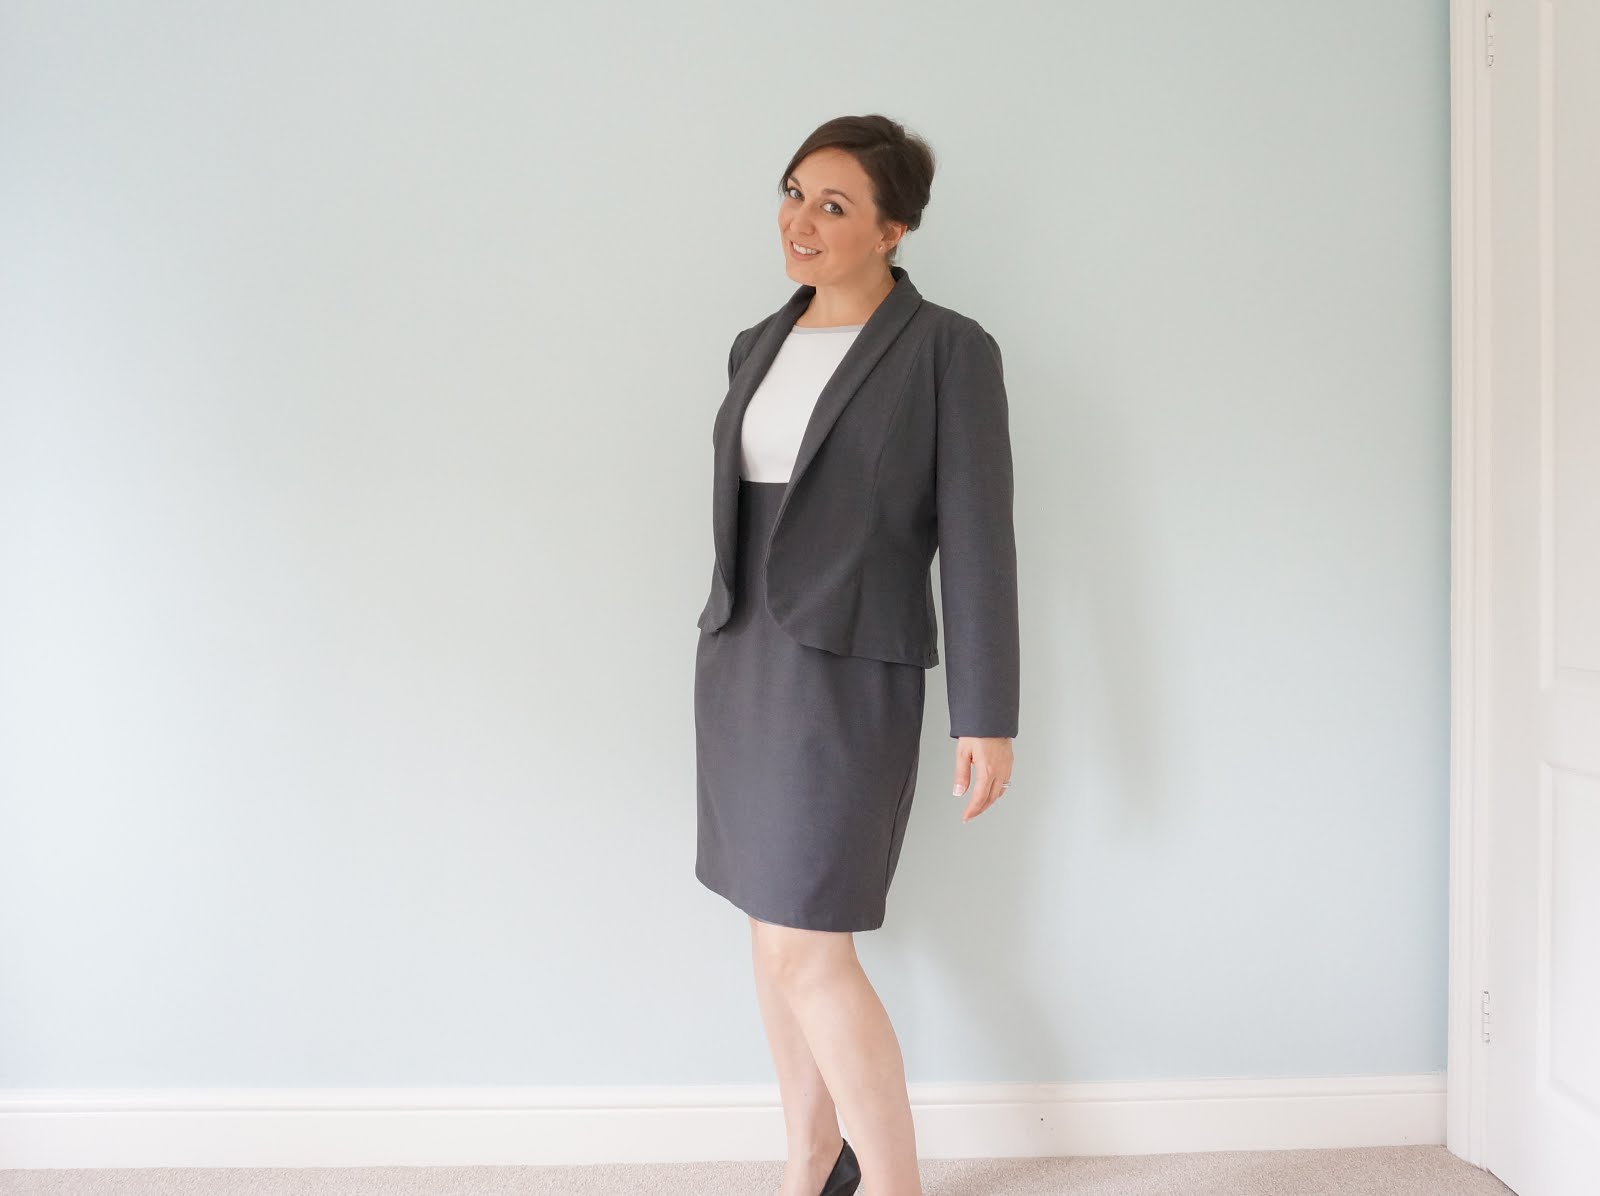 Threadcount Suit Jacket sewing pattern review